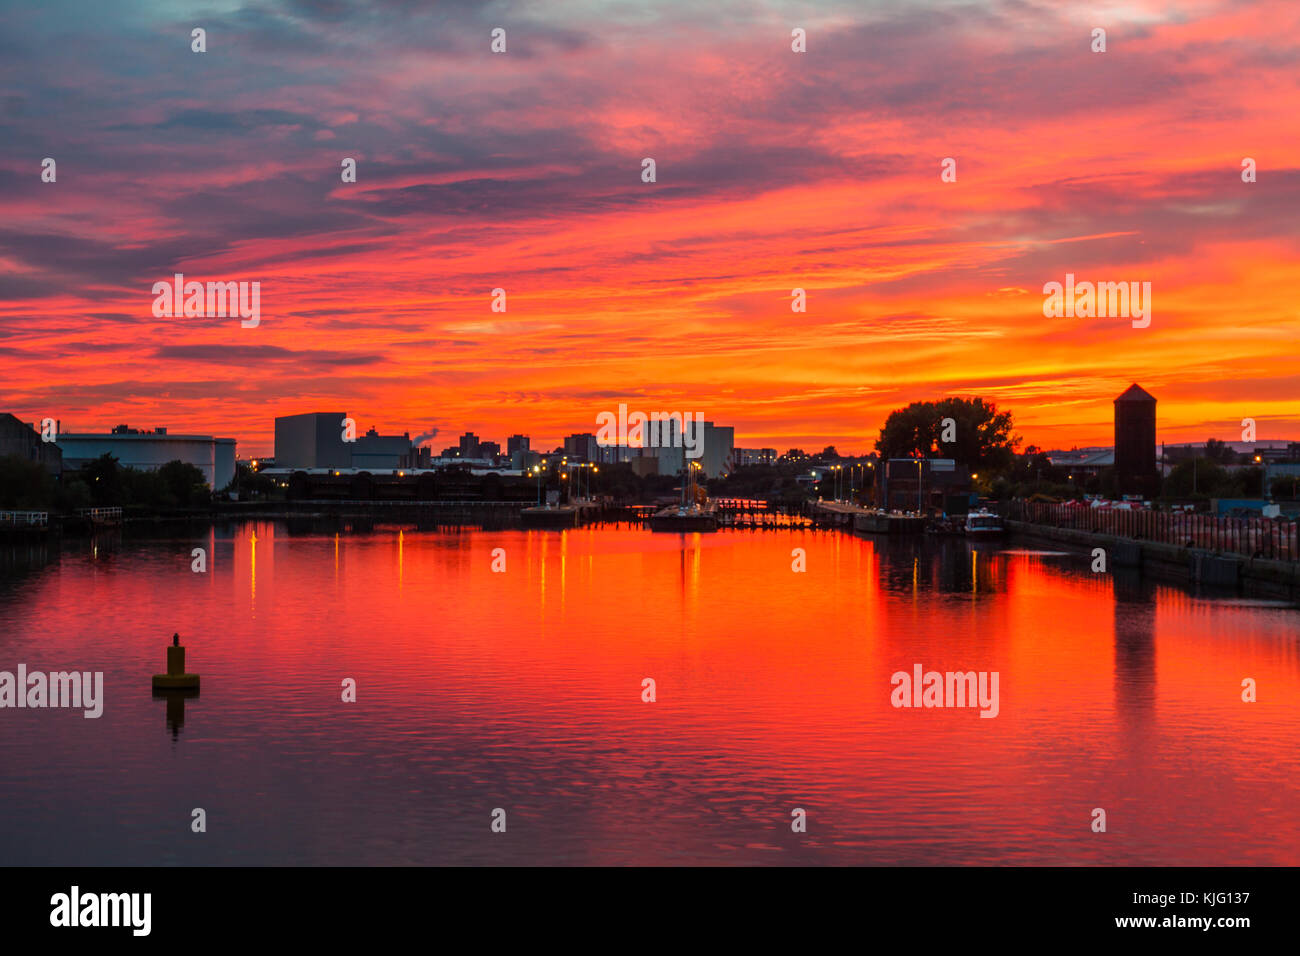 A Spectacular Sunset and Red Sky reflected in the Manchester Ship Canal at Salford Quays. Stock Photo